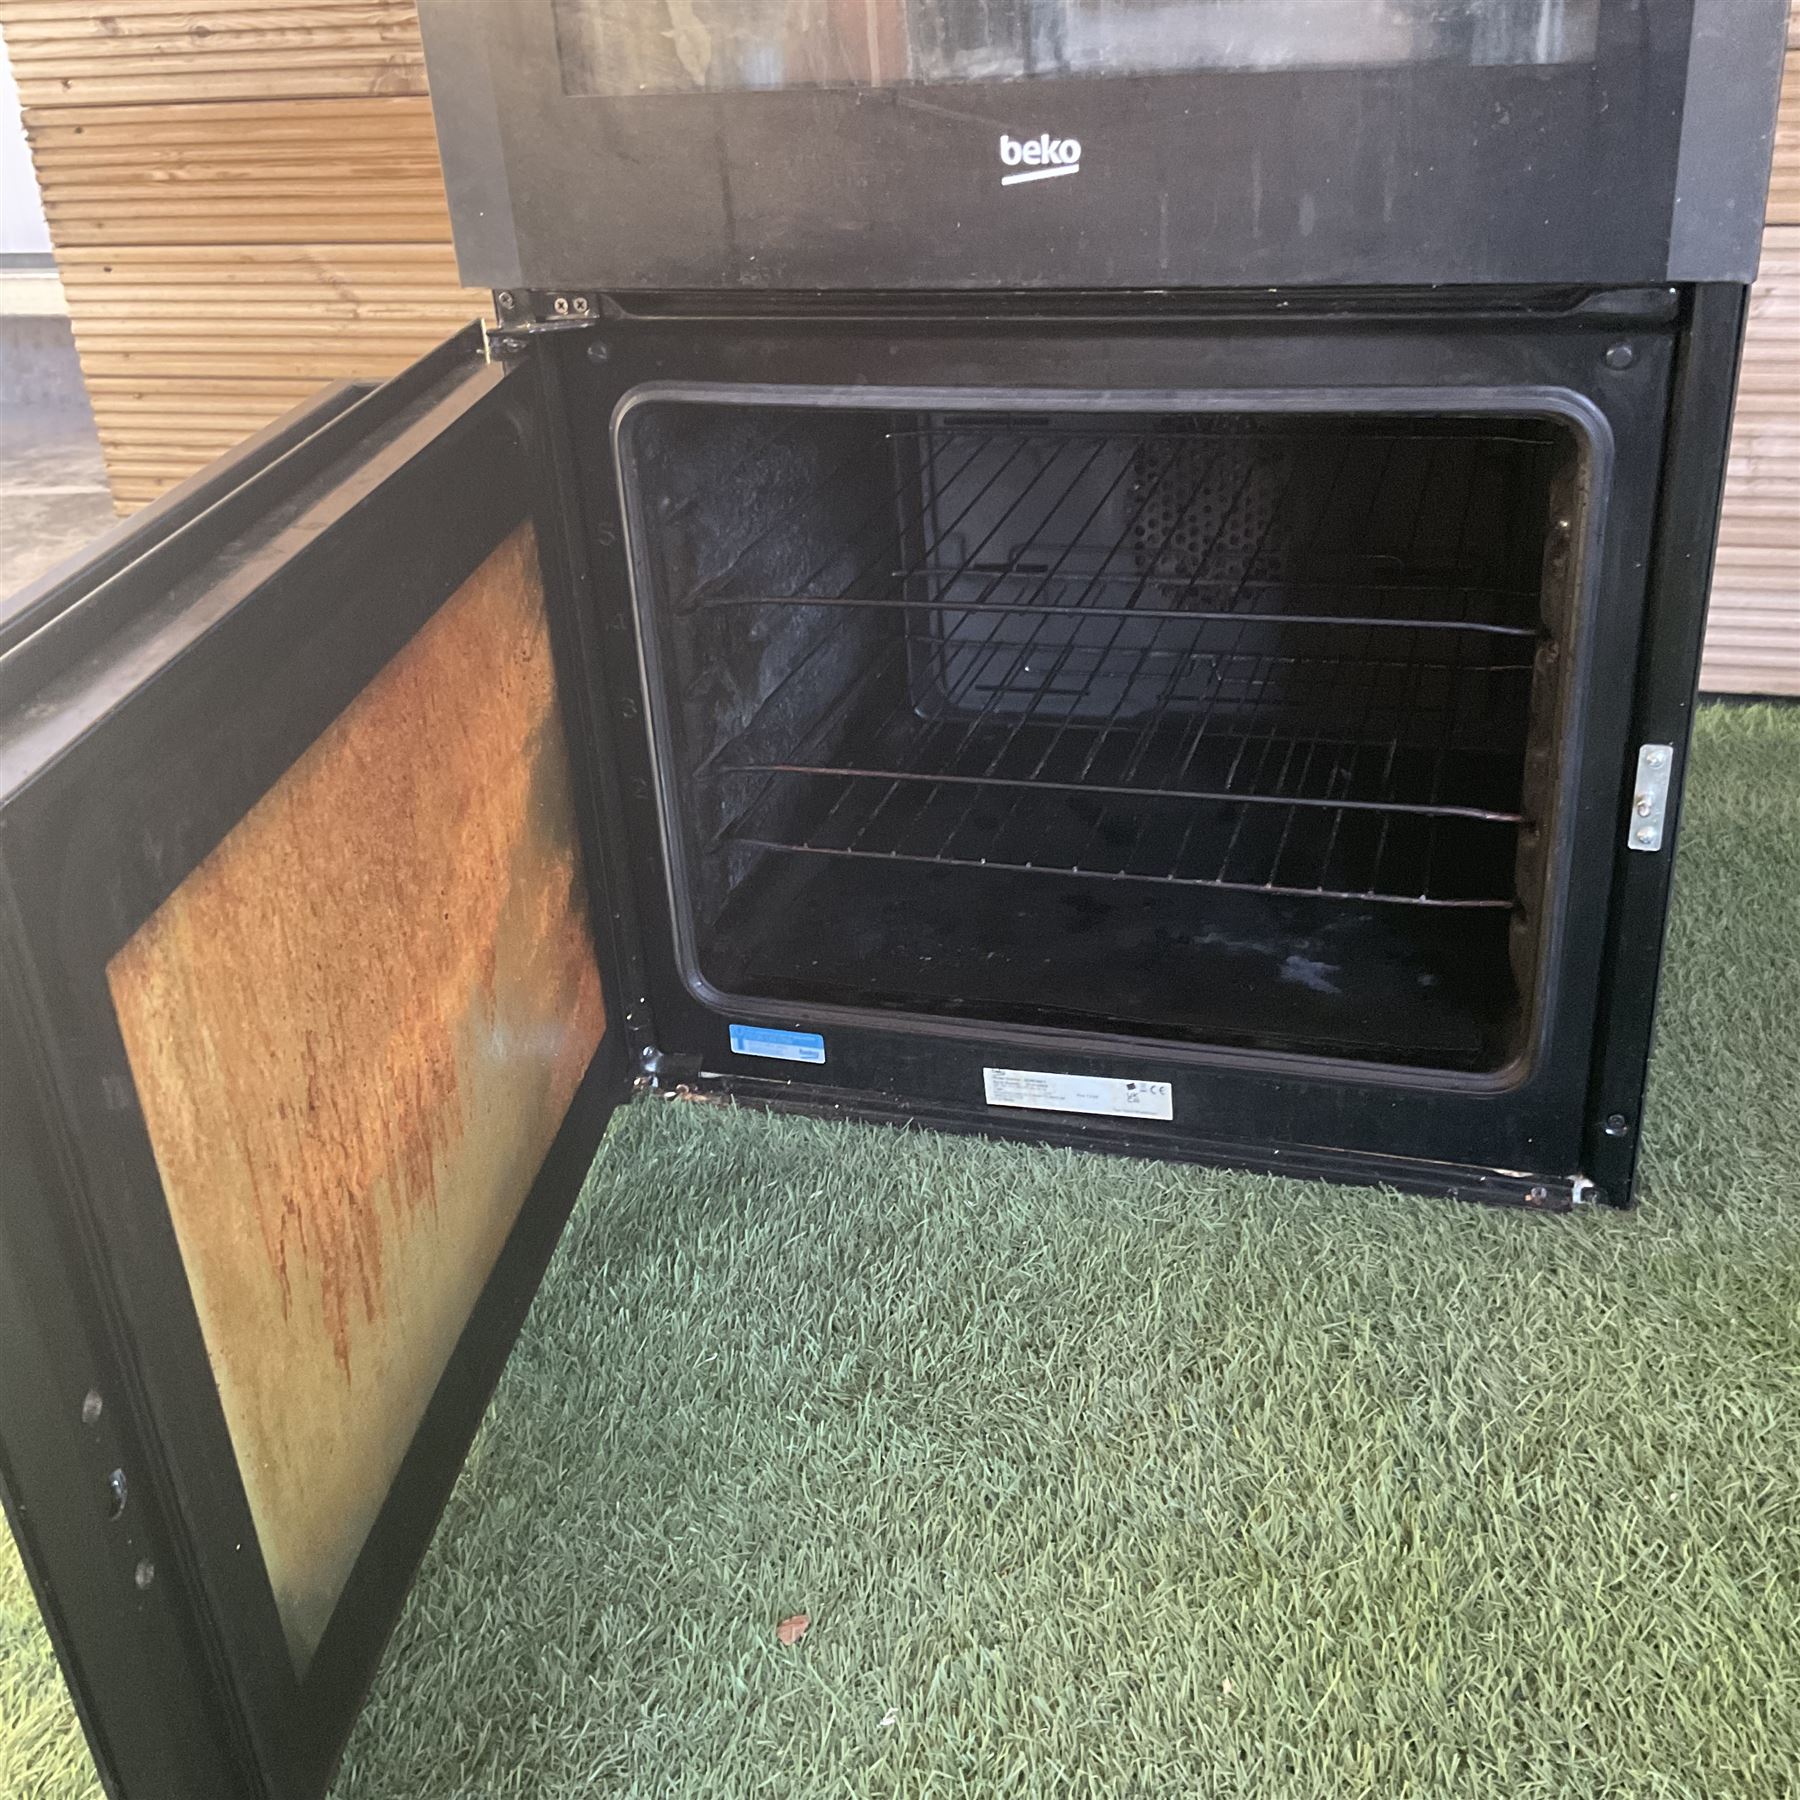 Beko BD16C55FA Double oven black finish domestic cooker - THIS LOT IS TO BE COLLECTED BY APPOINTMEN - Image 4 of 4